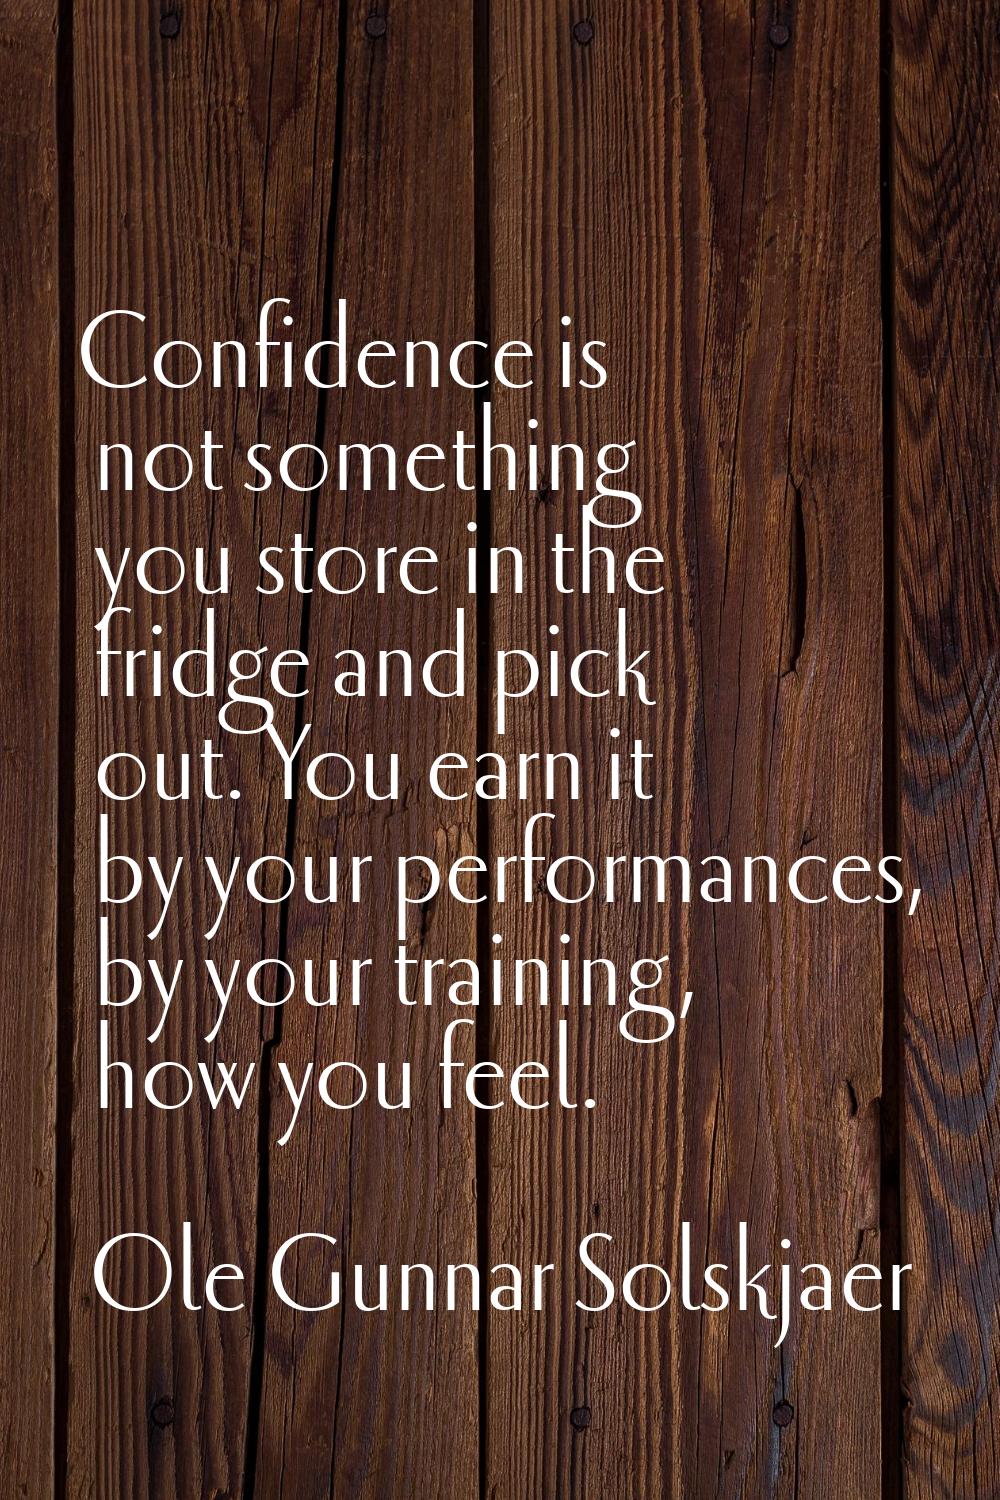 Confidence is not something you store in the fridge and pick out. You earn it by your performances,